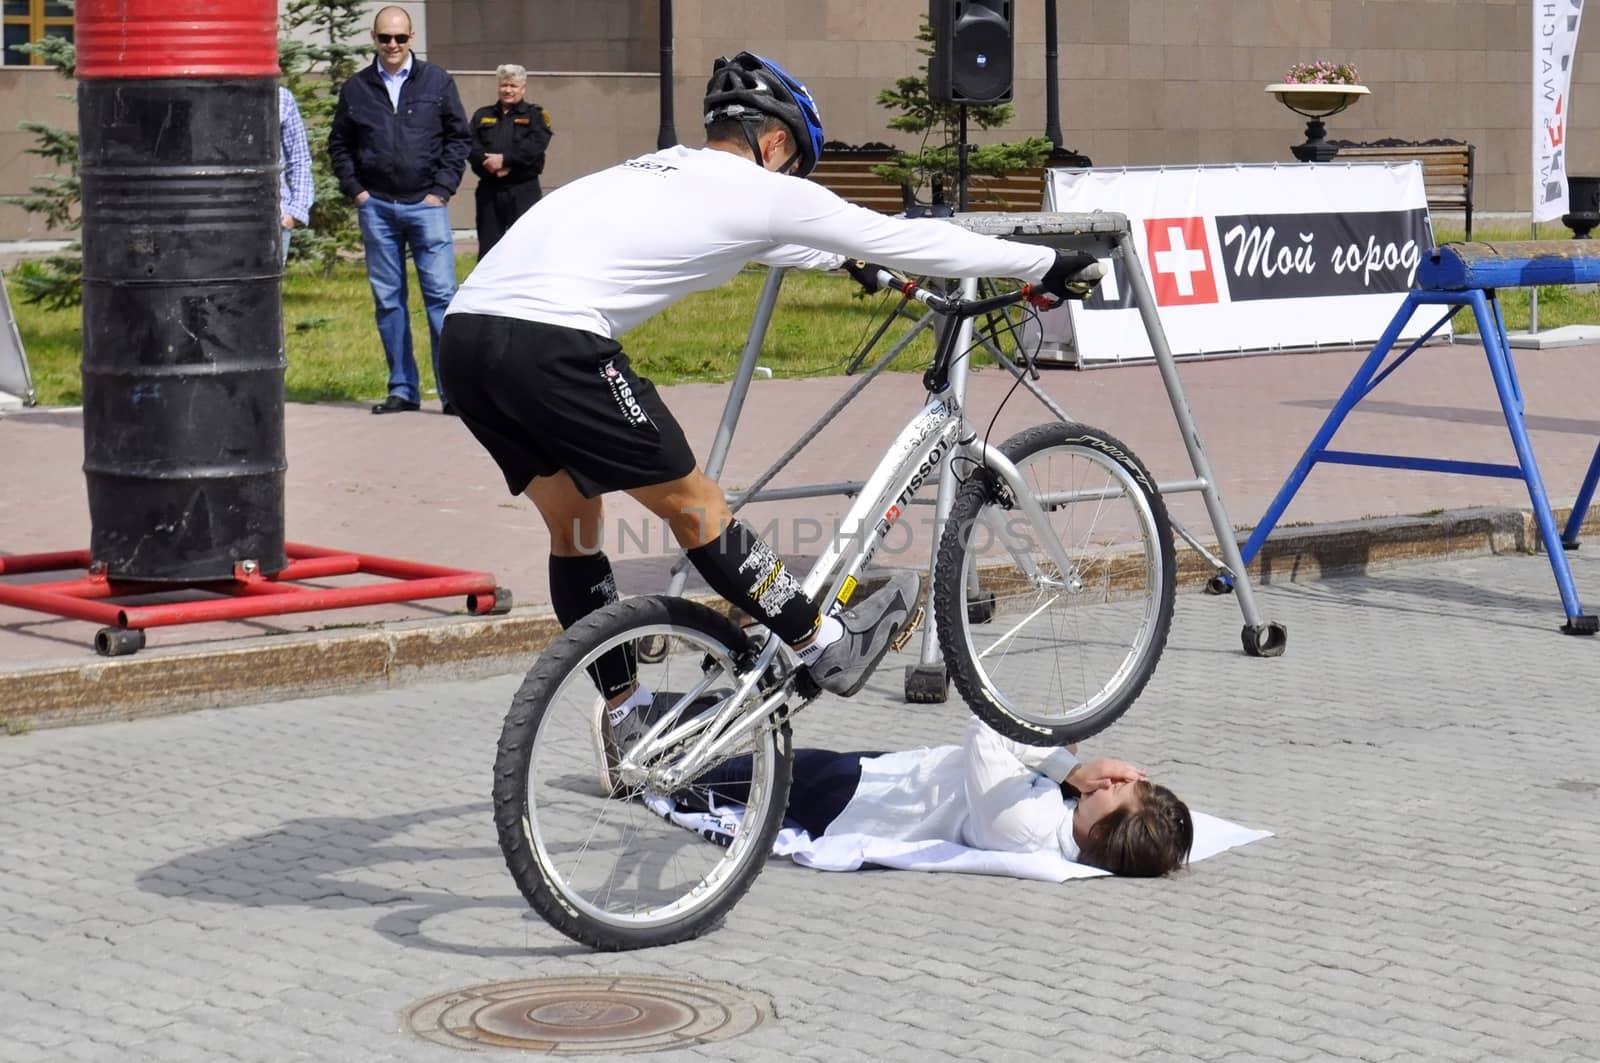 Timur Ibragimov � the champion of Russia on a cycle trial, acts  by veronka72